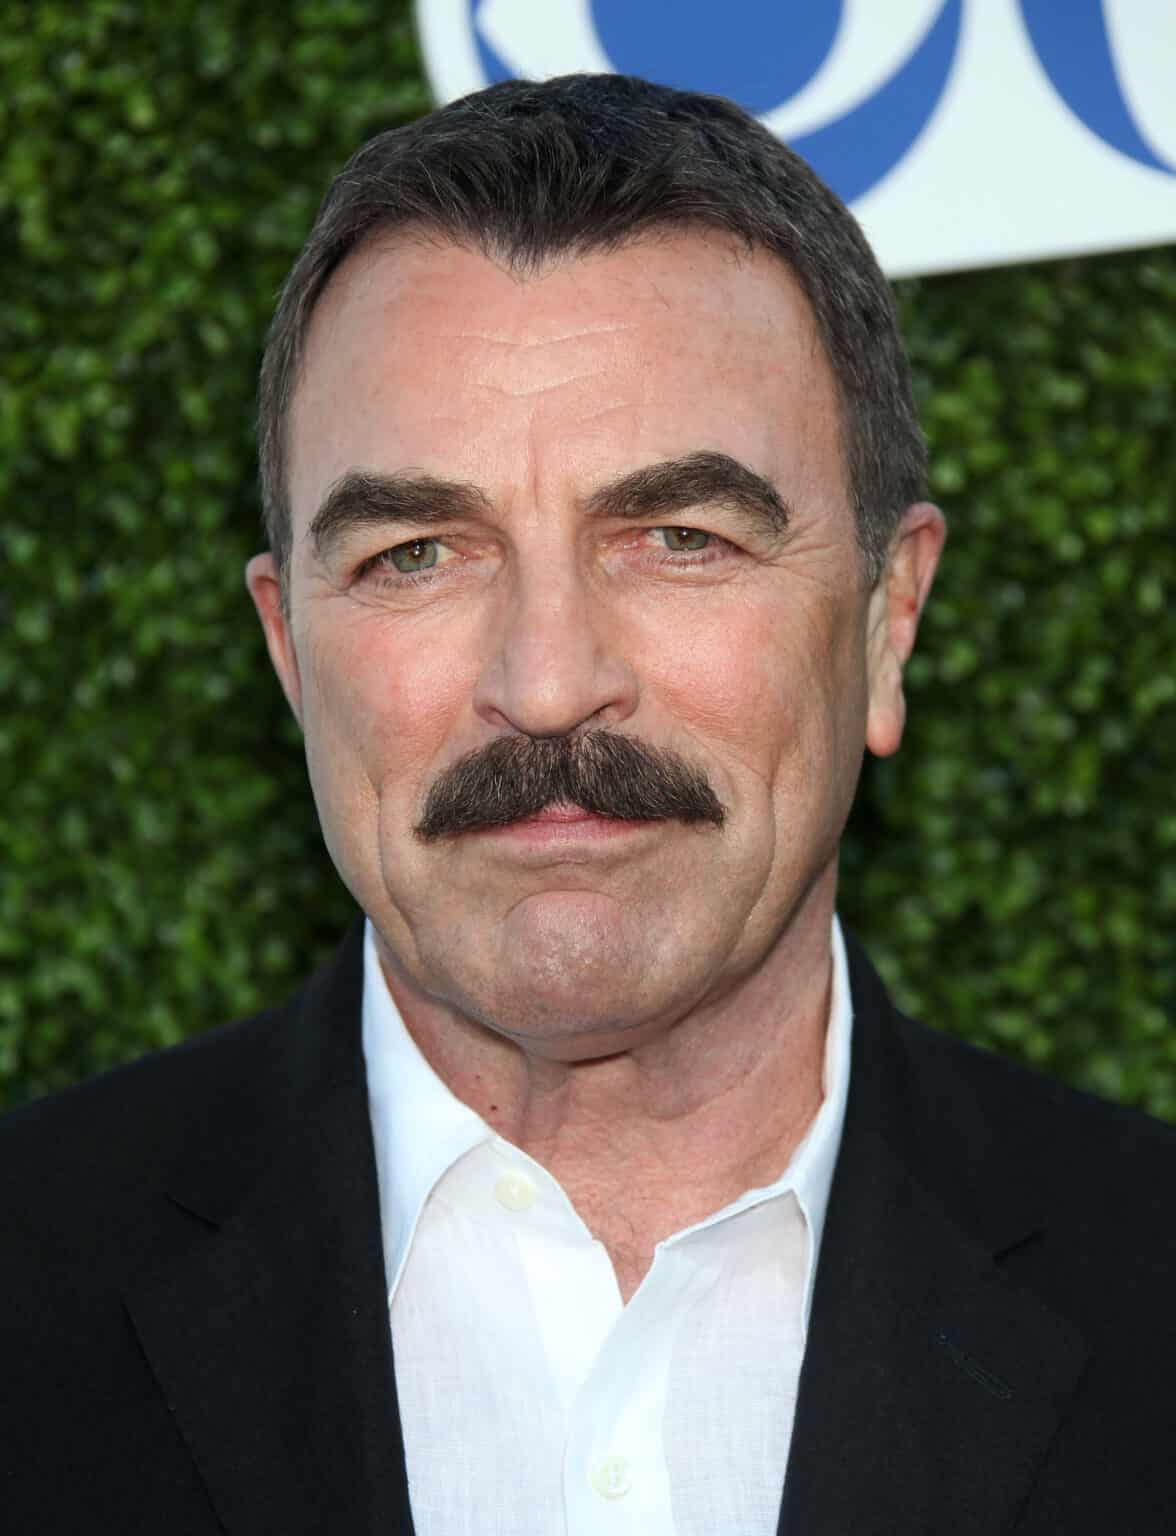 Where Does Tom Selleck Live?